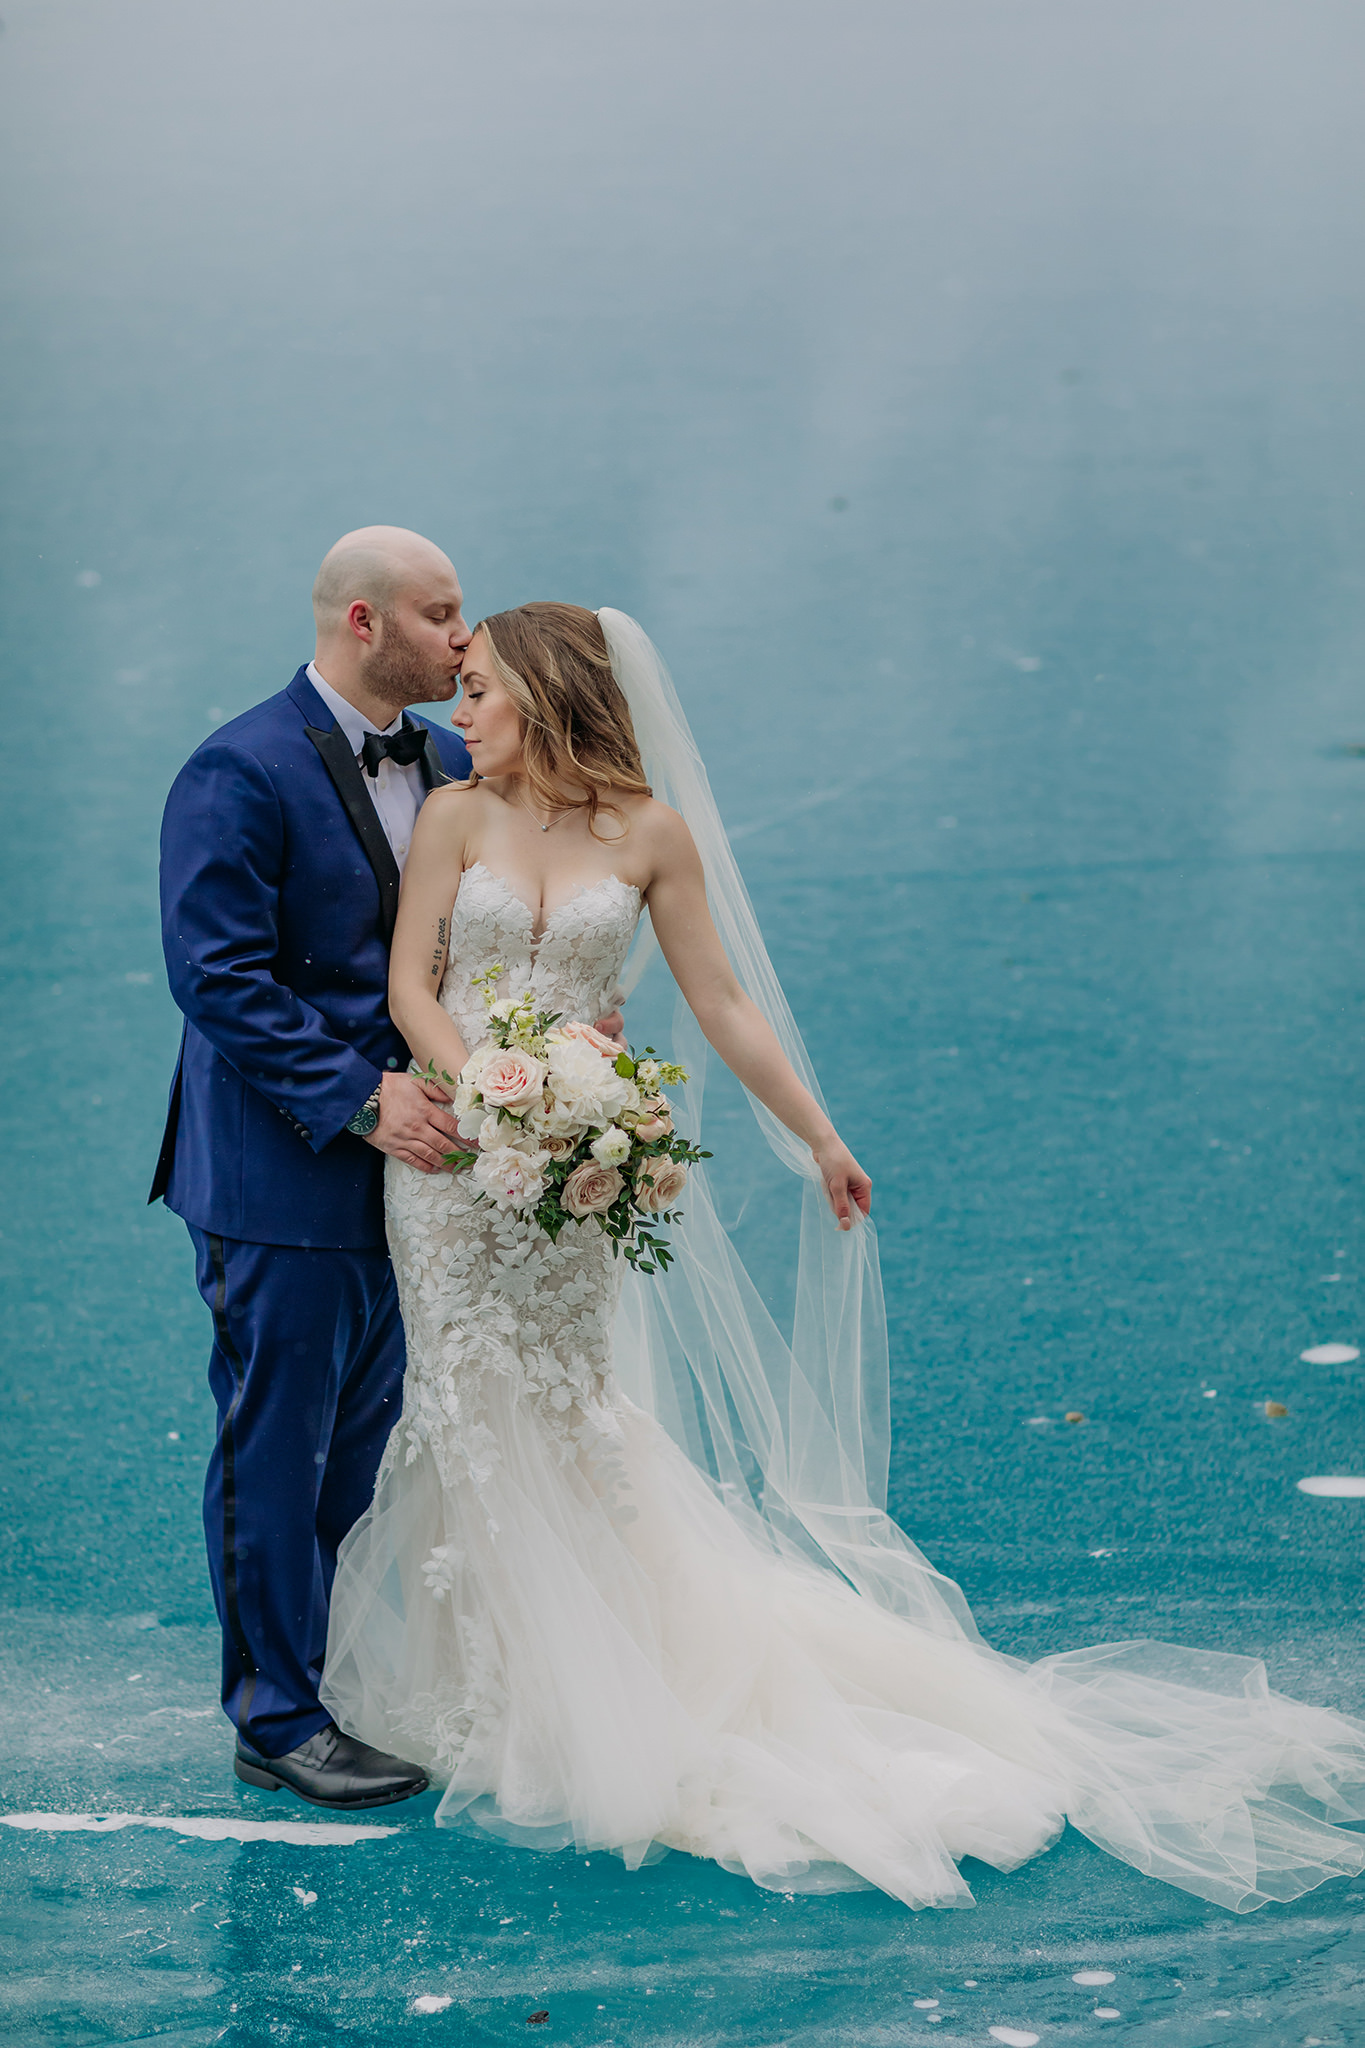 Epic blue ice backdrop for outdoor winter wedding at Lake Louise in the Canadian Rocky Mountains